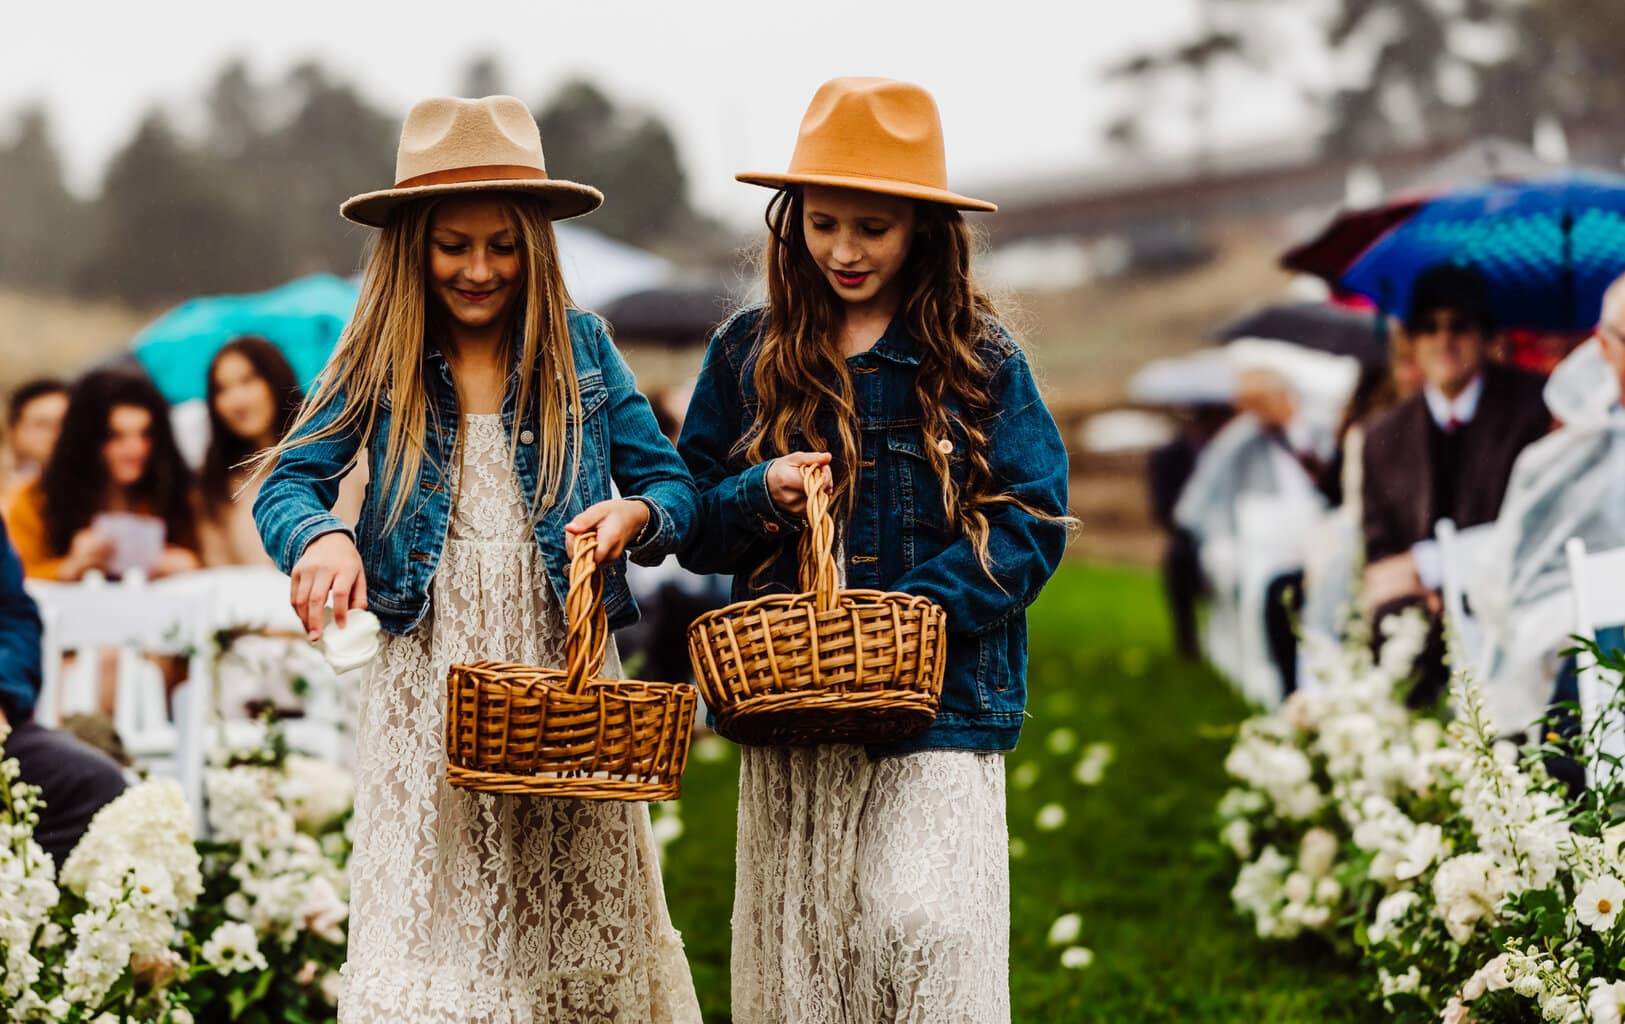 Colorado Wedding Photographer | The photograph shows two young flower girls walking down the aisle at a wedding. They are holding wicker baskets that are filled with flowers and throwing the flowers on the outdoor aisle as they walk towards the altar. The girls are dressed in lacy white, bohemian style dresses. They have on jean jackets and tan brimmed hats.